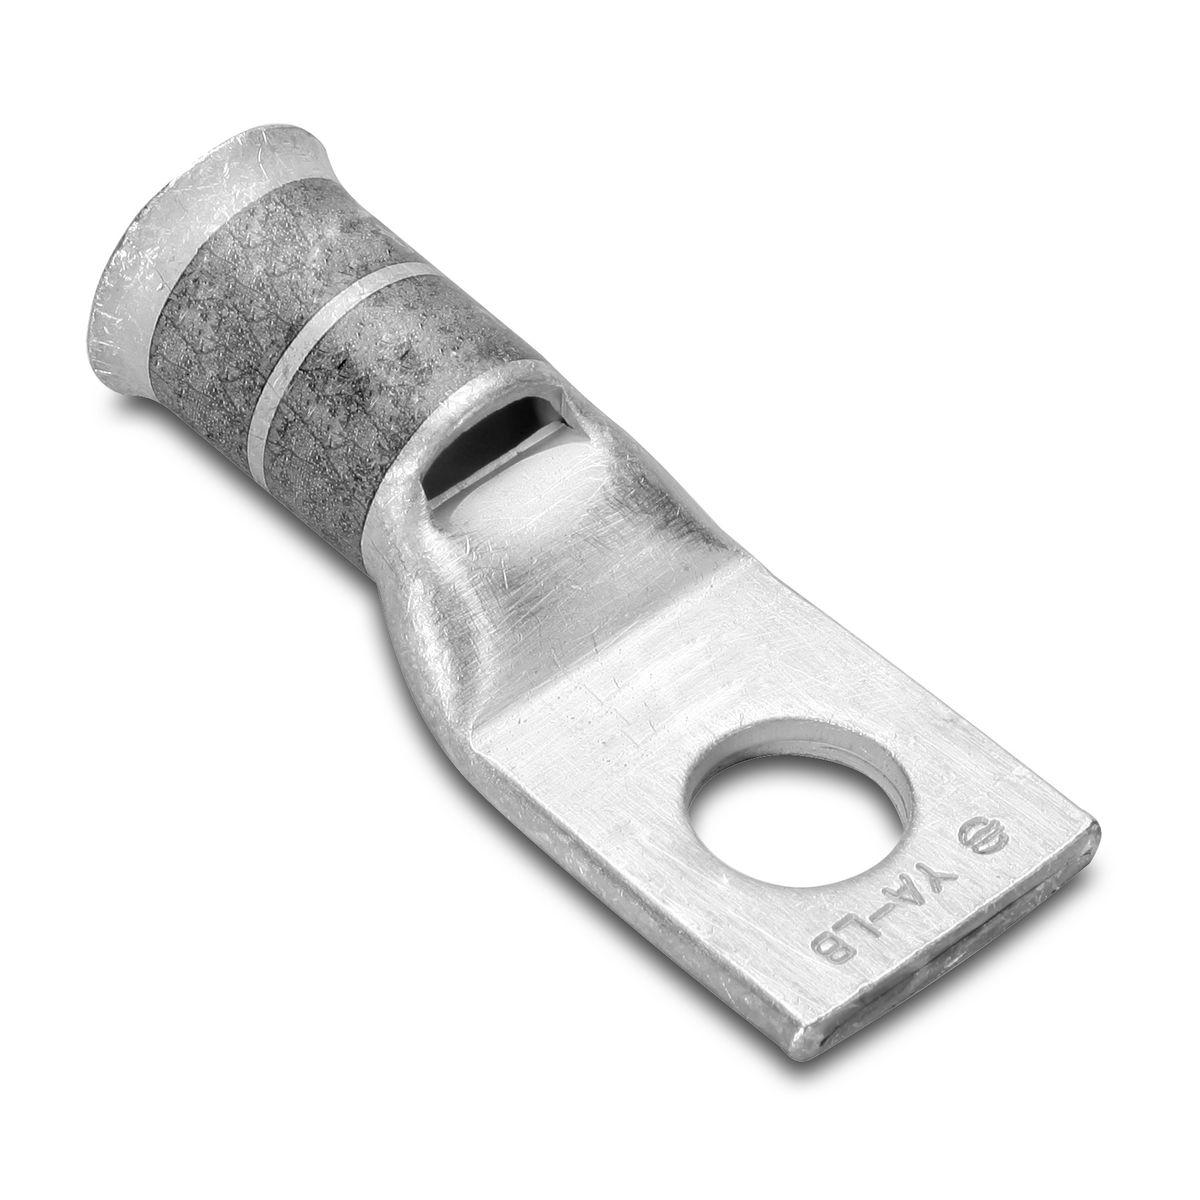 Hubbell YA38LB 700 kcmil, 500 FLEX I,K,M535 DLO550 FLEX G,H,I CU, One Hole, 5/8 Stud Size, Standard Barrel, Bell End, Tin Plated, UL/CSA, 90°C, Up to 35kV, Orange Color Code, 23 CODE1029 FLEX Die Index.  ; Features: UL Listed 90 DEG C, 600 V - 35 KV, Temperature Rating: